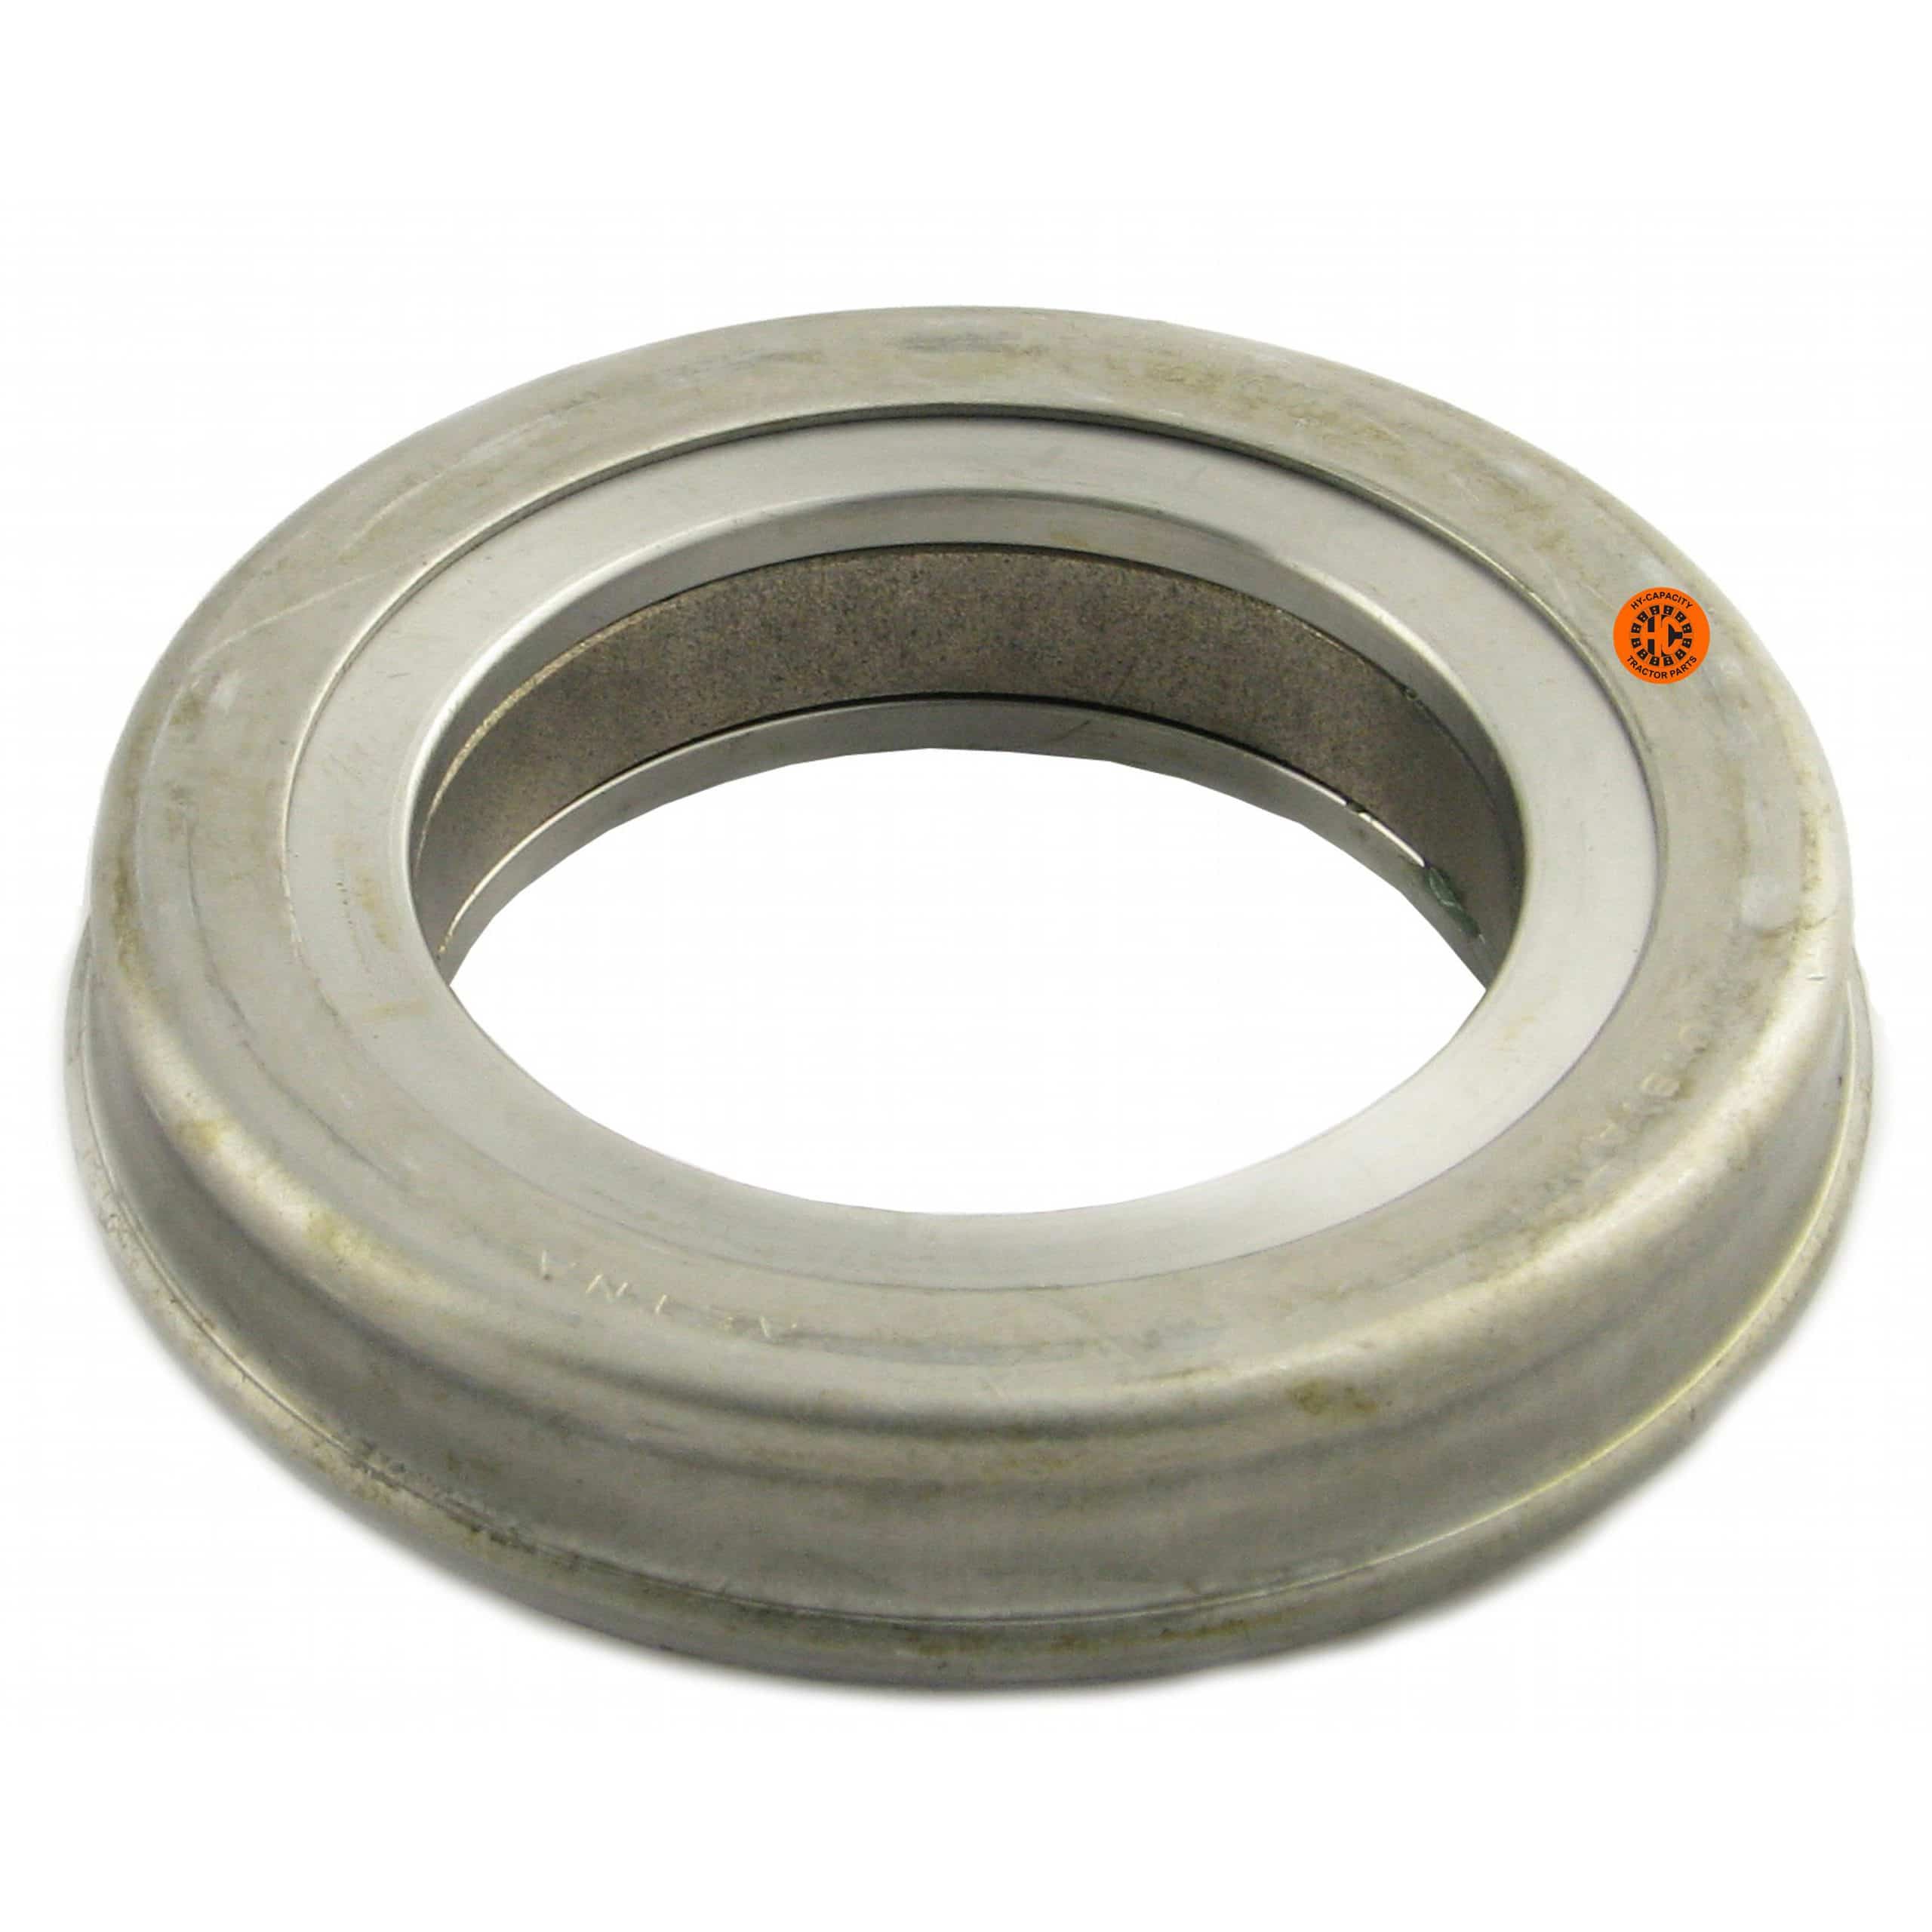 244 #AA69DL 254 1 Pcs Release Bearing 8301338 1.572 ID Compatible with International 234 